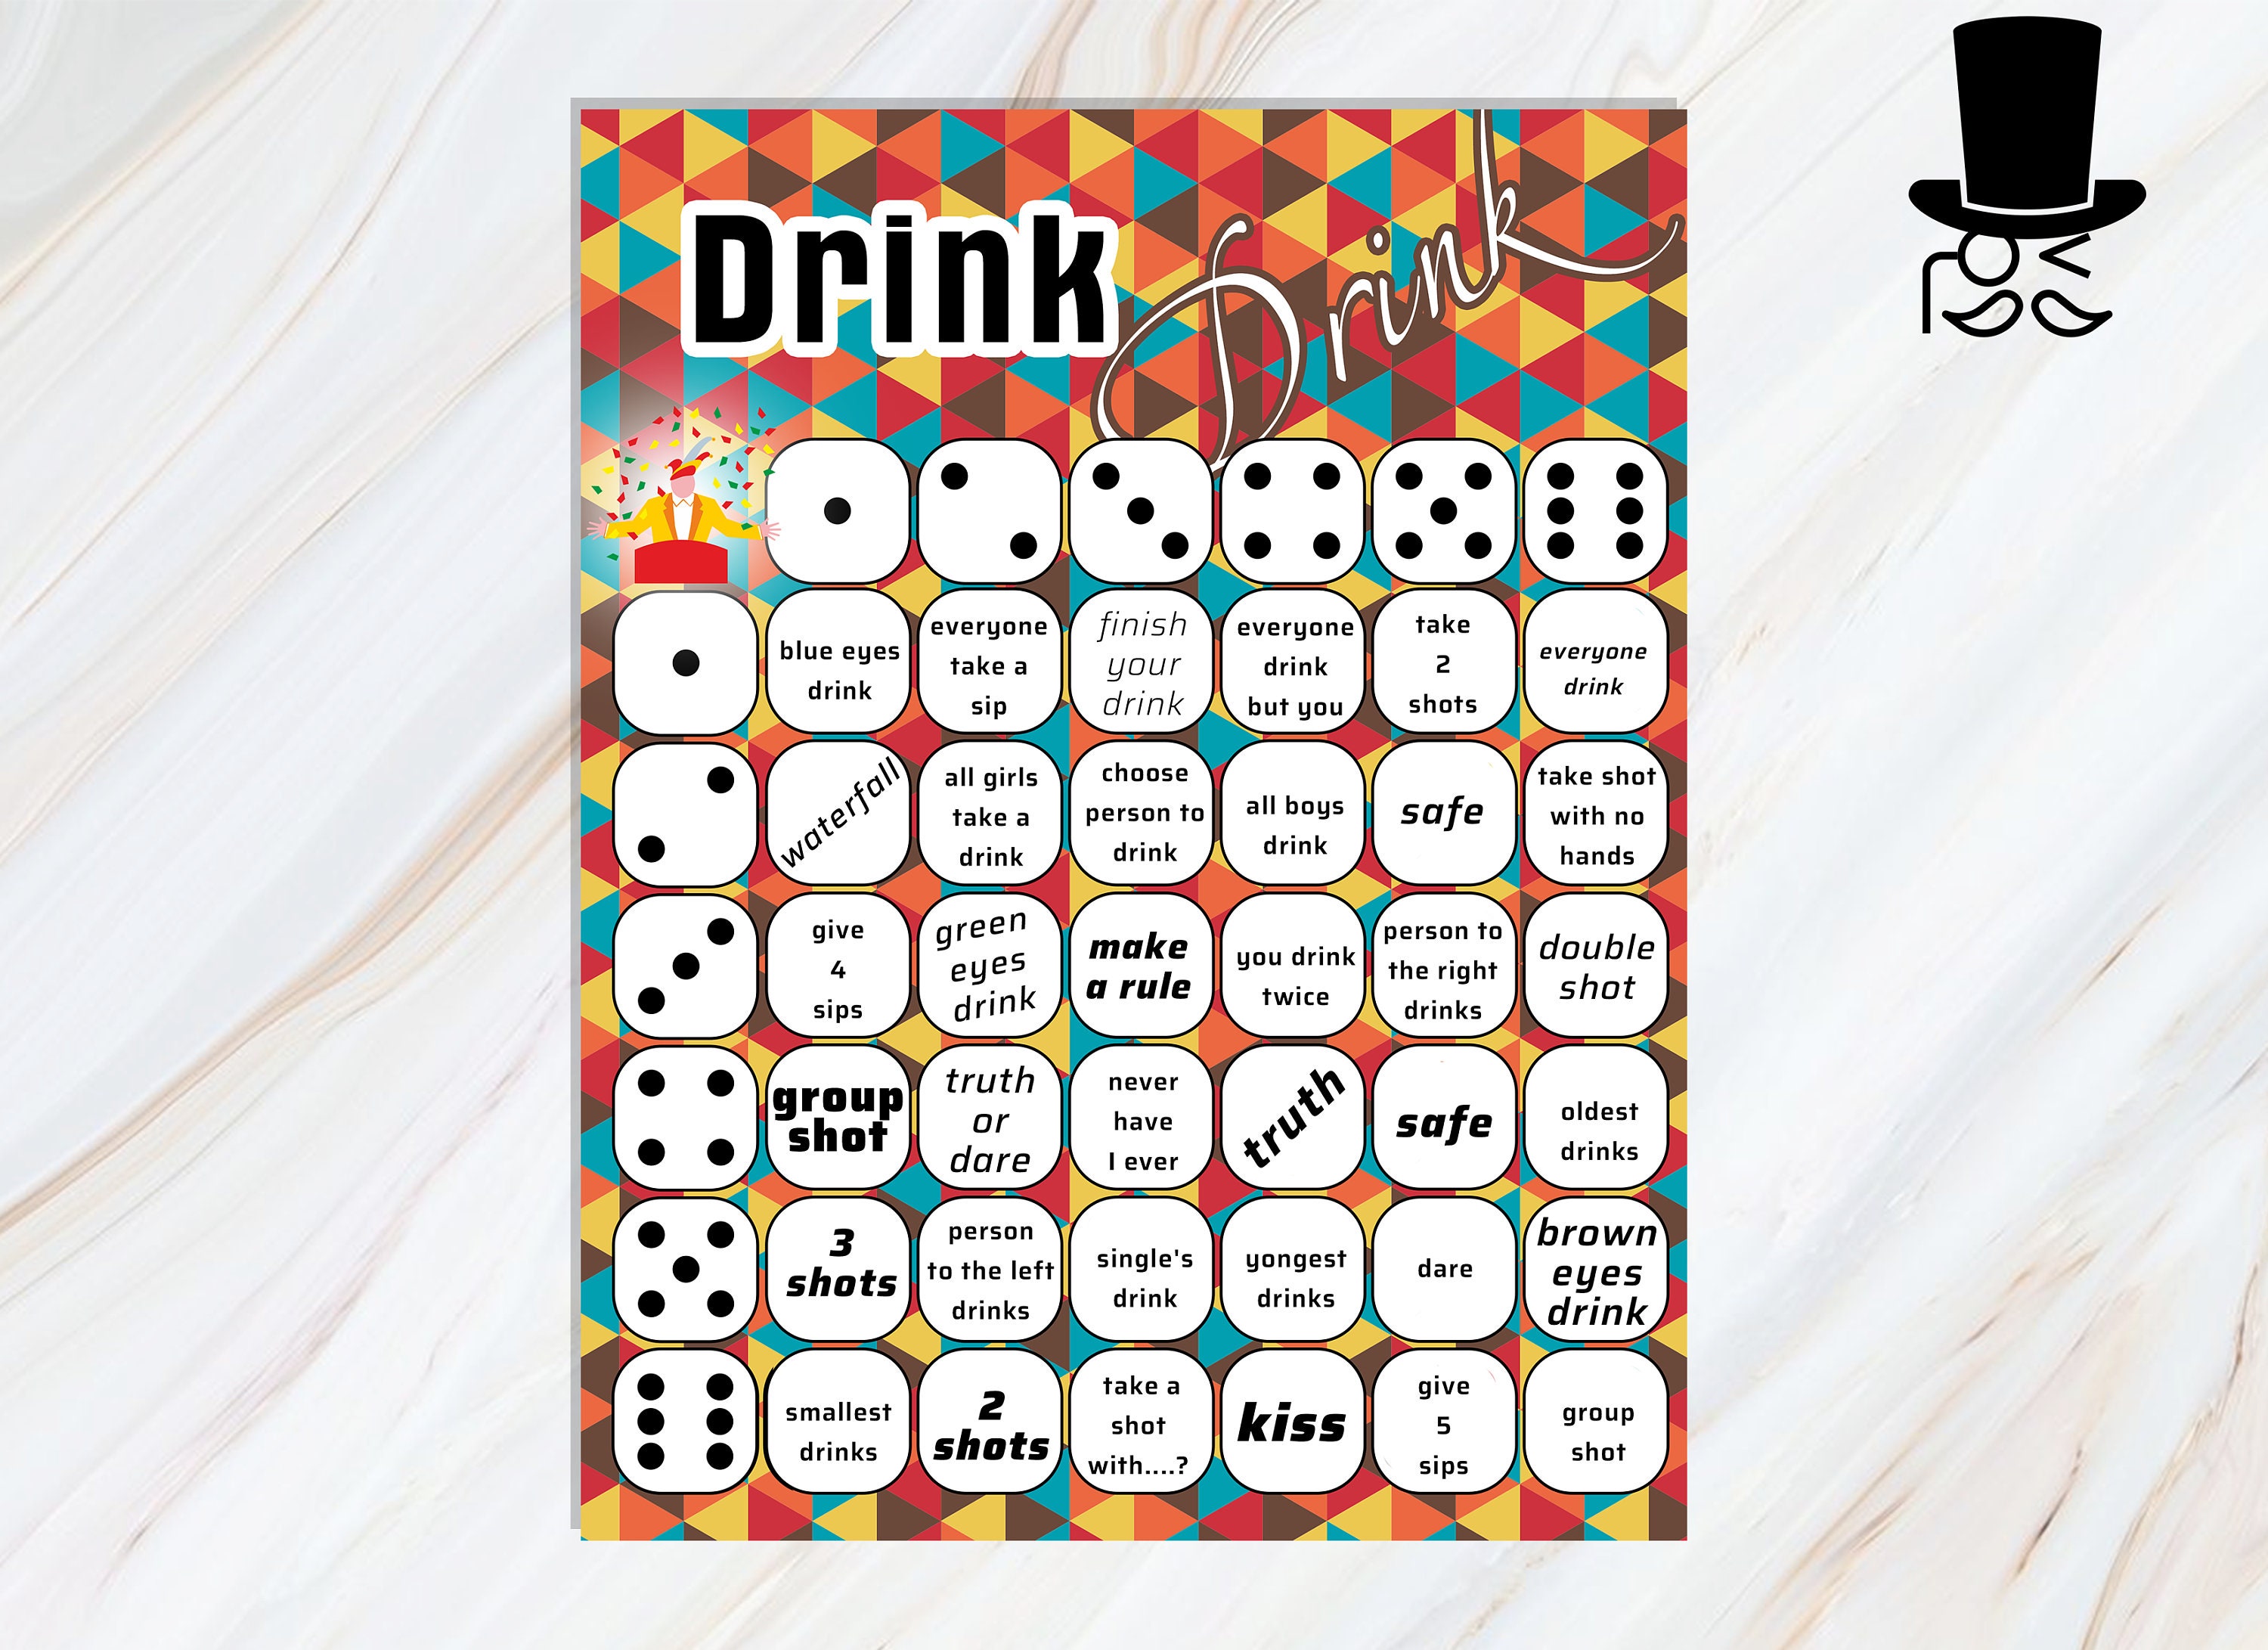 8-best-images-of-printable-drinking-games-drink-if-drunk-dice-party-drinking-games-printable